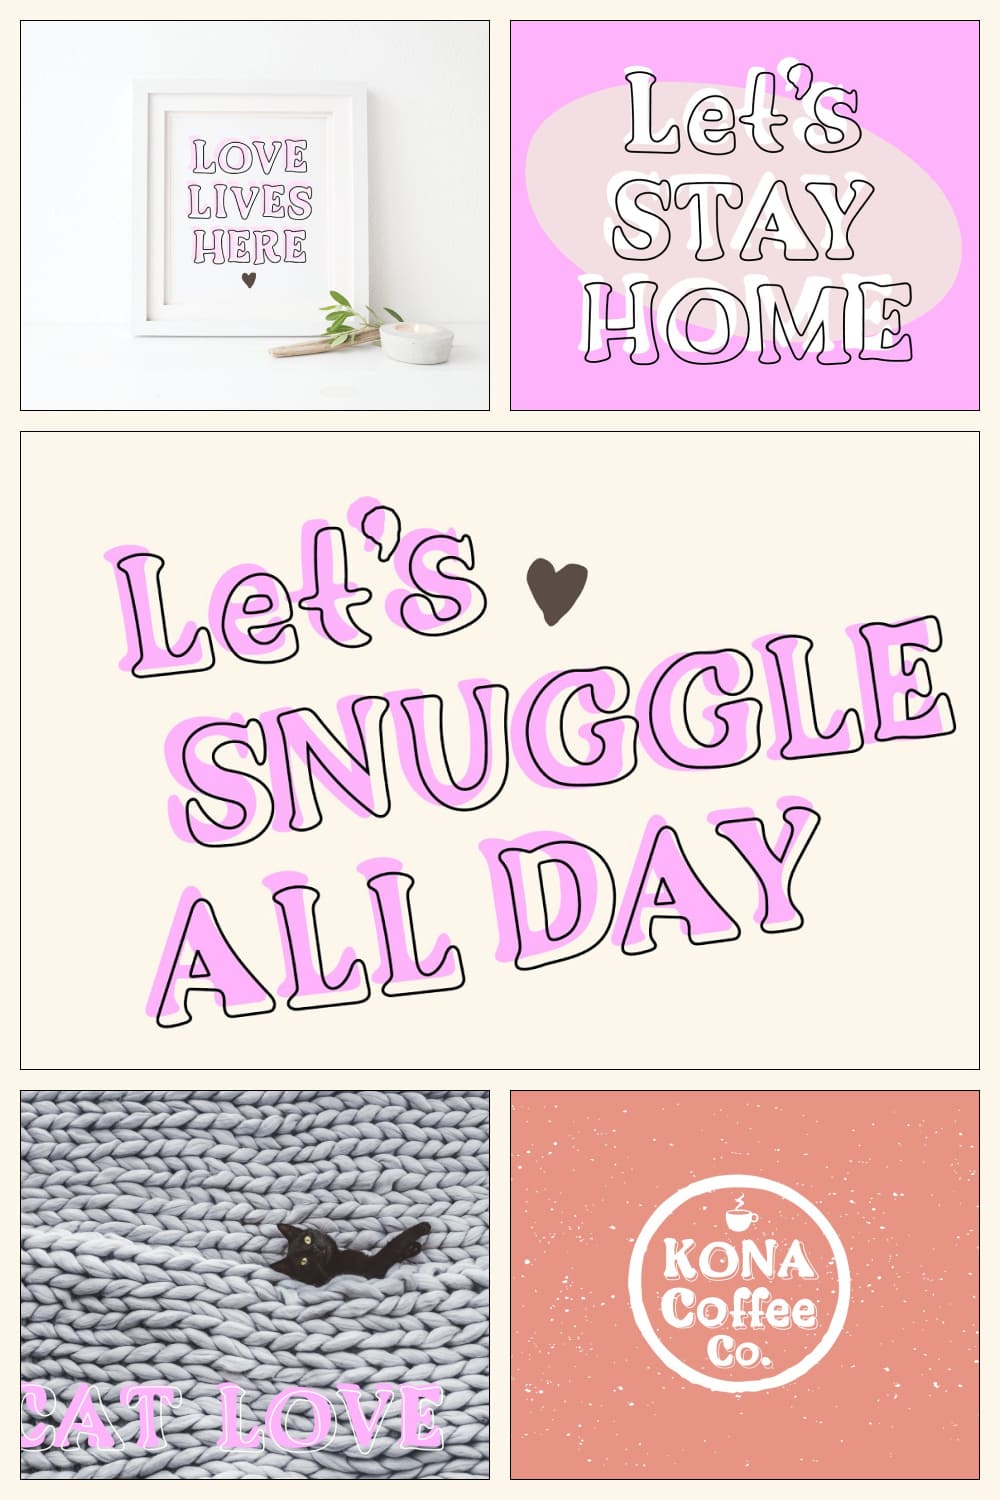 Introducing Cozy Outline - "Let's Snuggle All Day", "Let's Stay Home", "Kona Coffee Co".